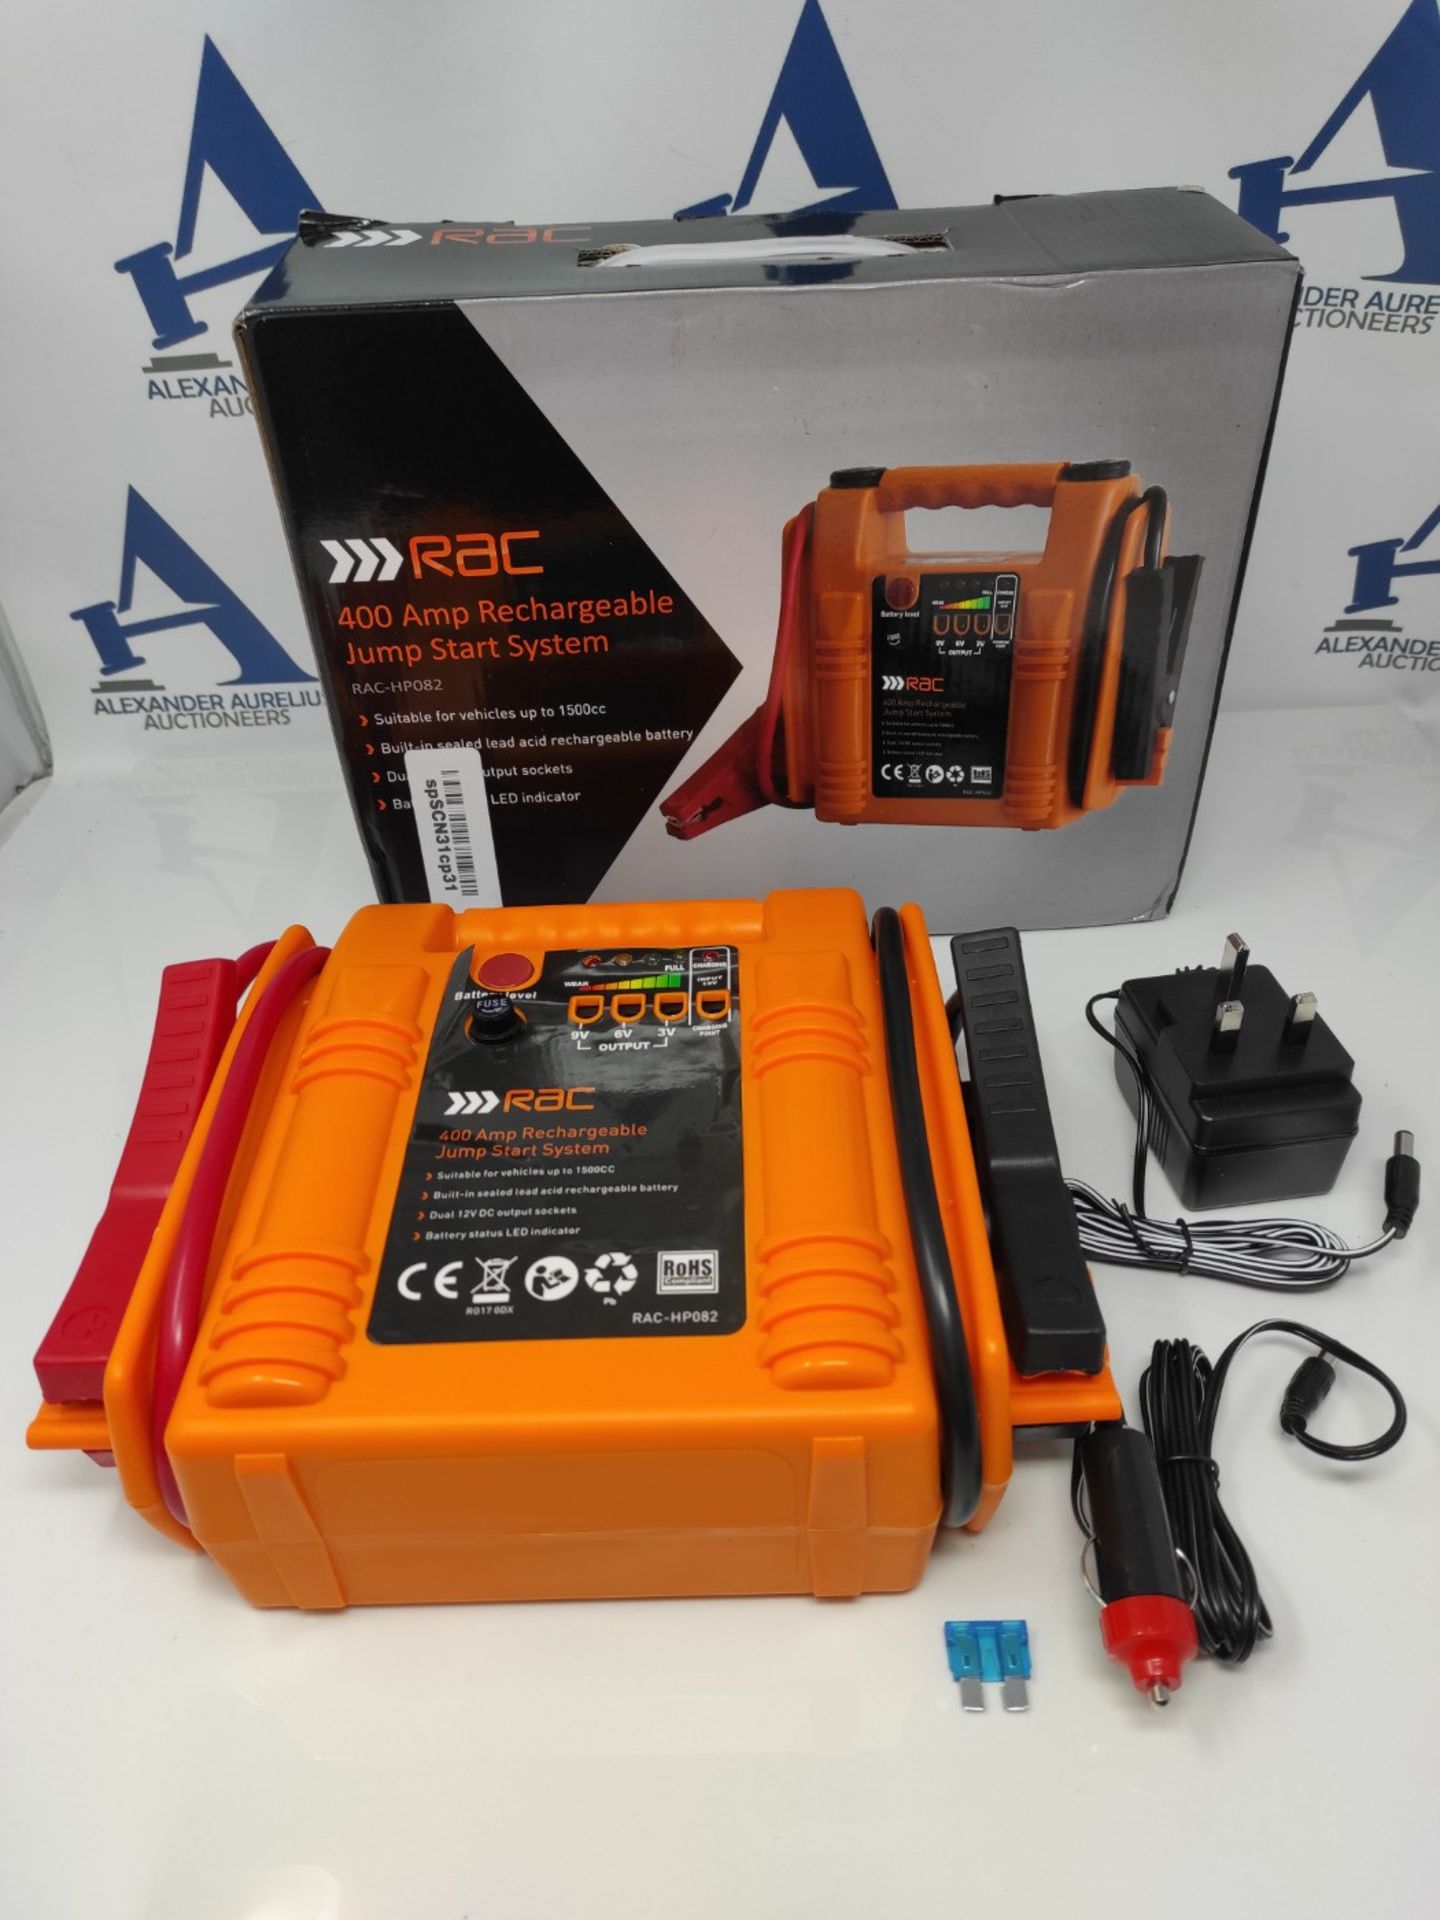 RAC 400 Amp Rechargeable Jump Start System HP082 - For Car Batteries up to 1500cc, Ora - Image 2 of 2